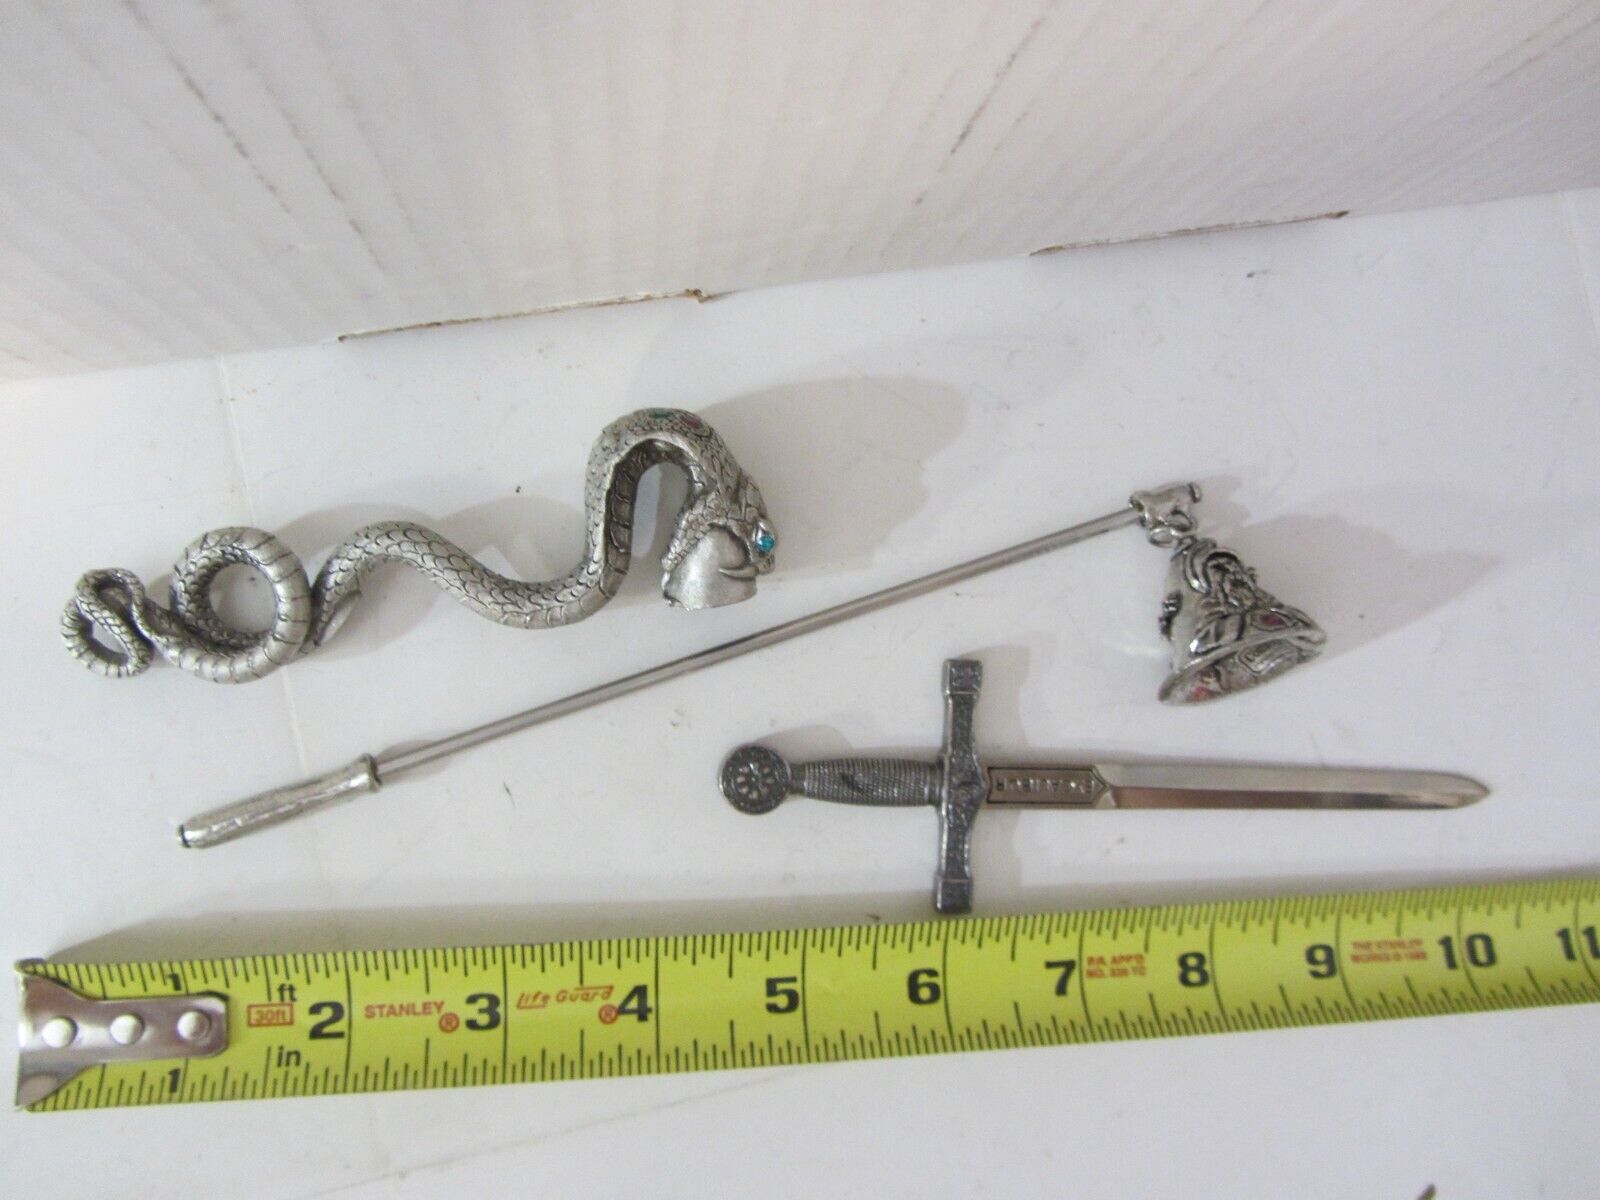 Snake Wizard Comstock Pewter Candle Snuffer w/ EXCALIBUR sword - 3 fantasy items